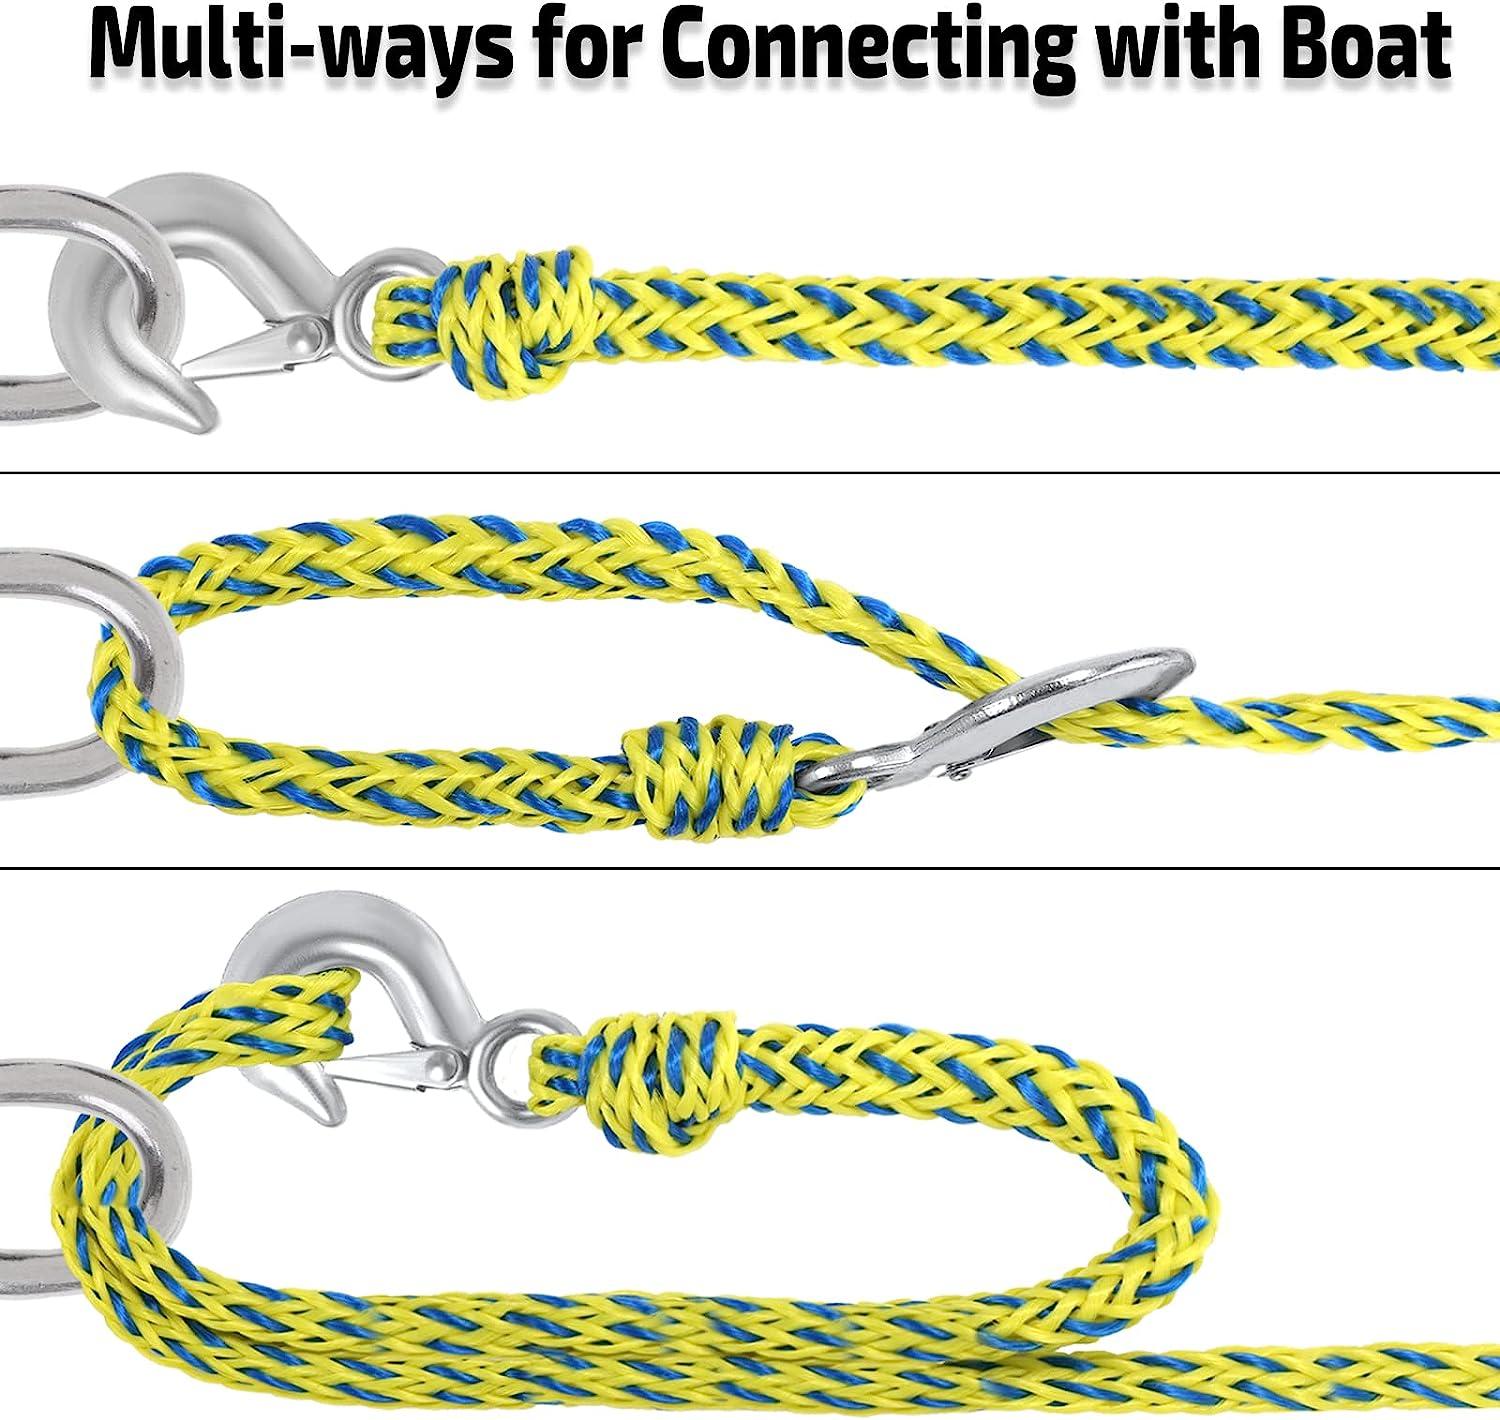 Swonder Boat Tow Harness for Tubing, 16ft Boat Tow Rope for Tubing